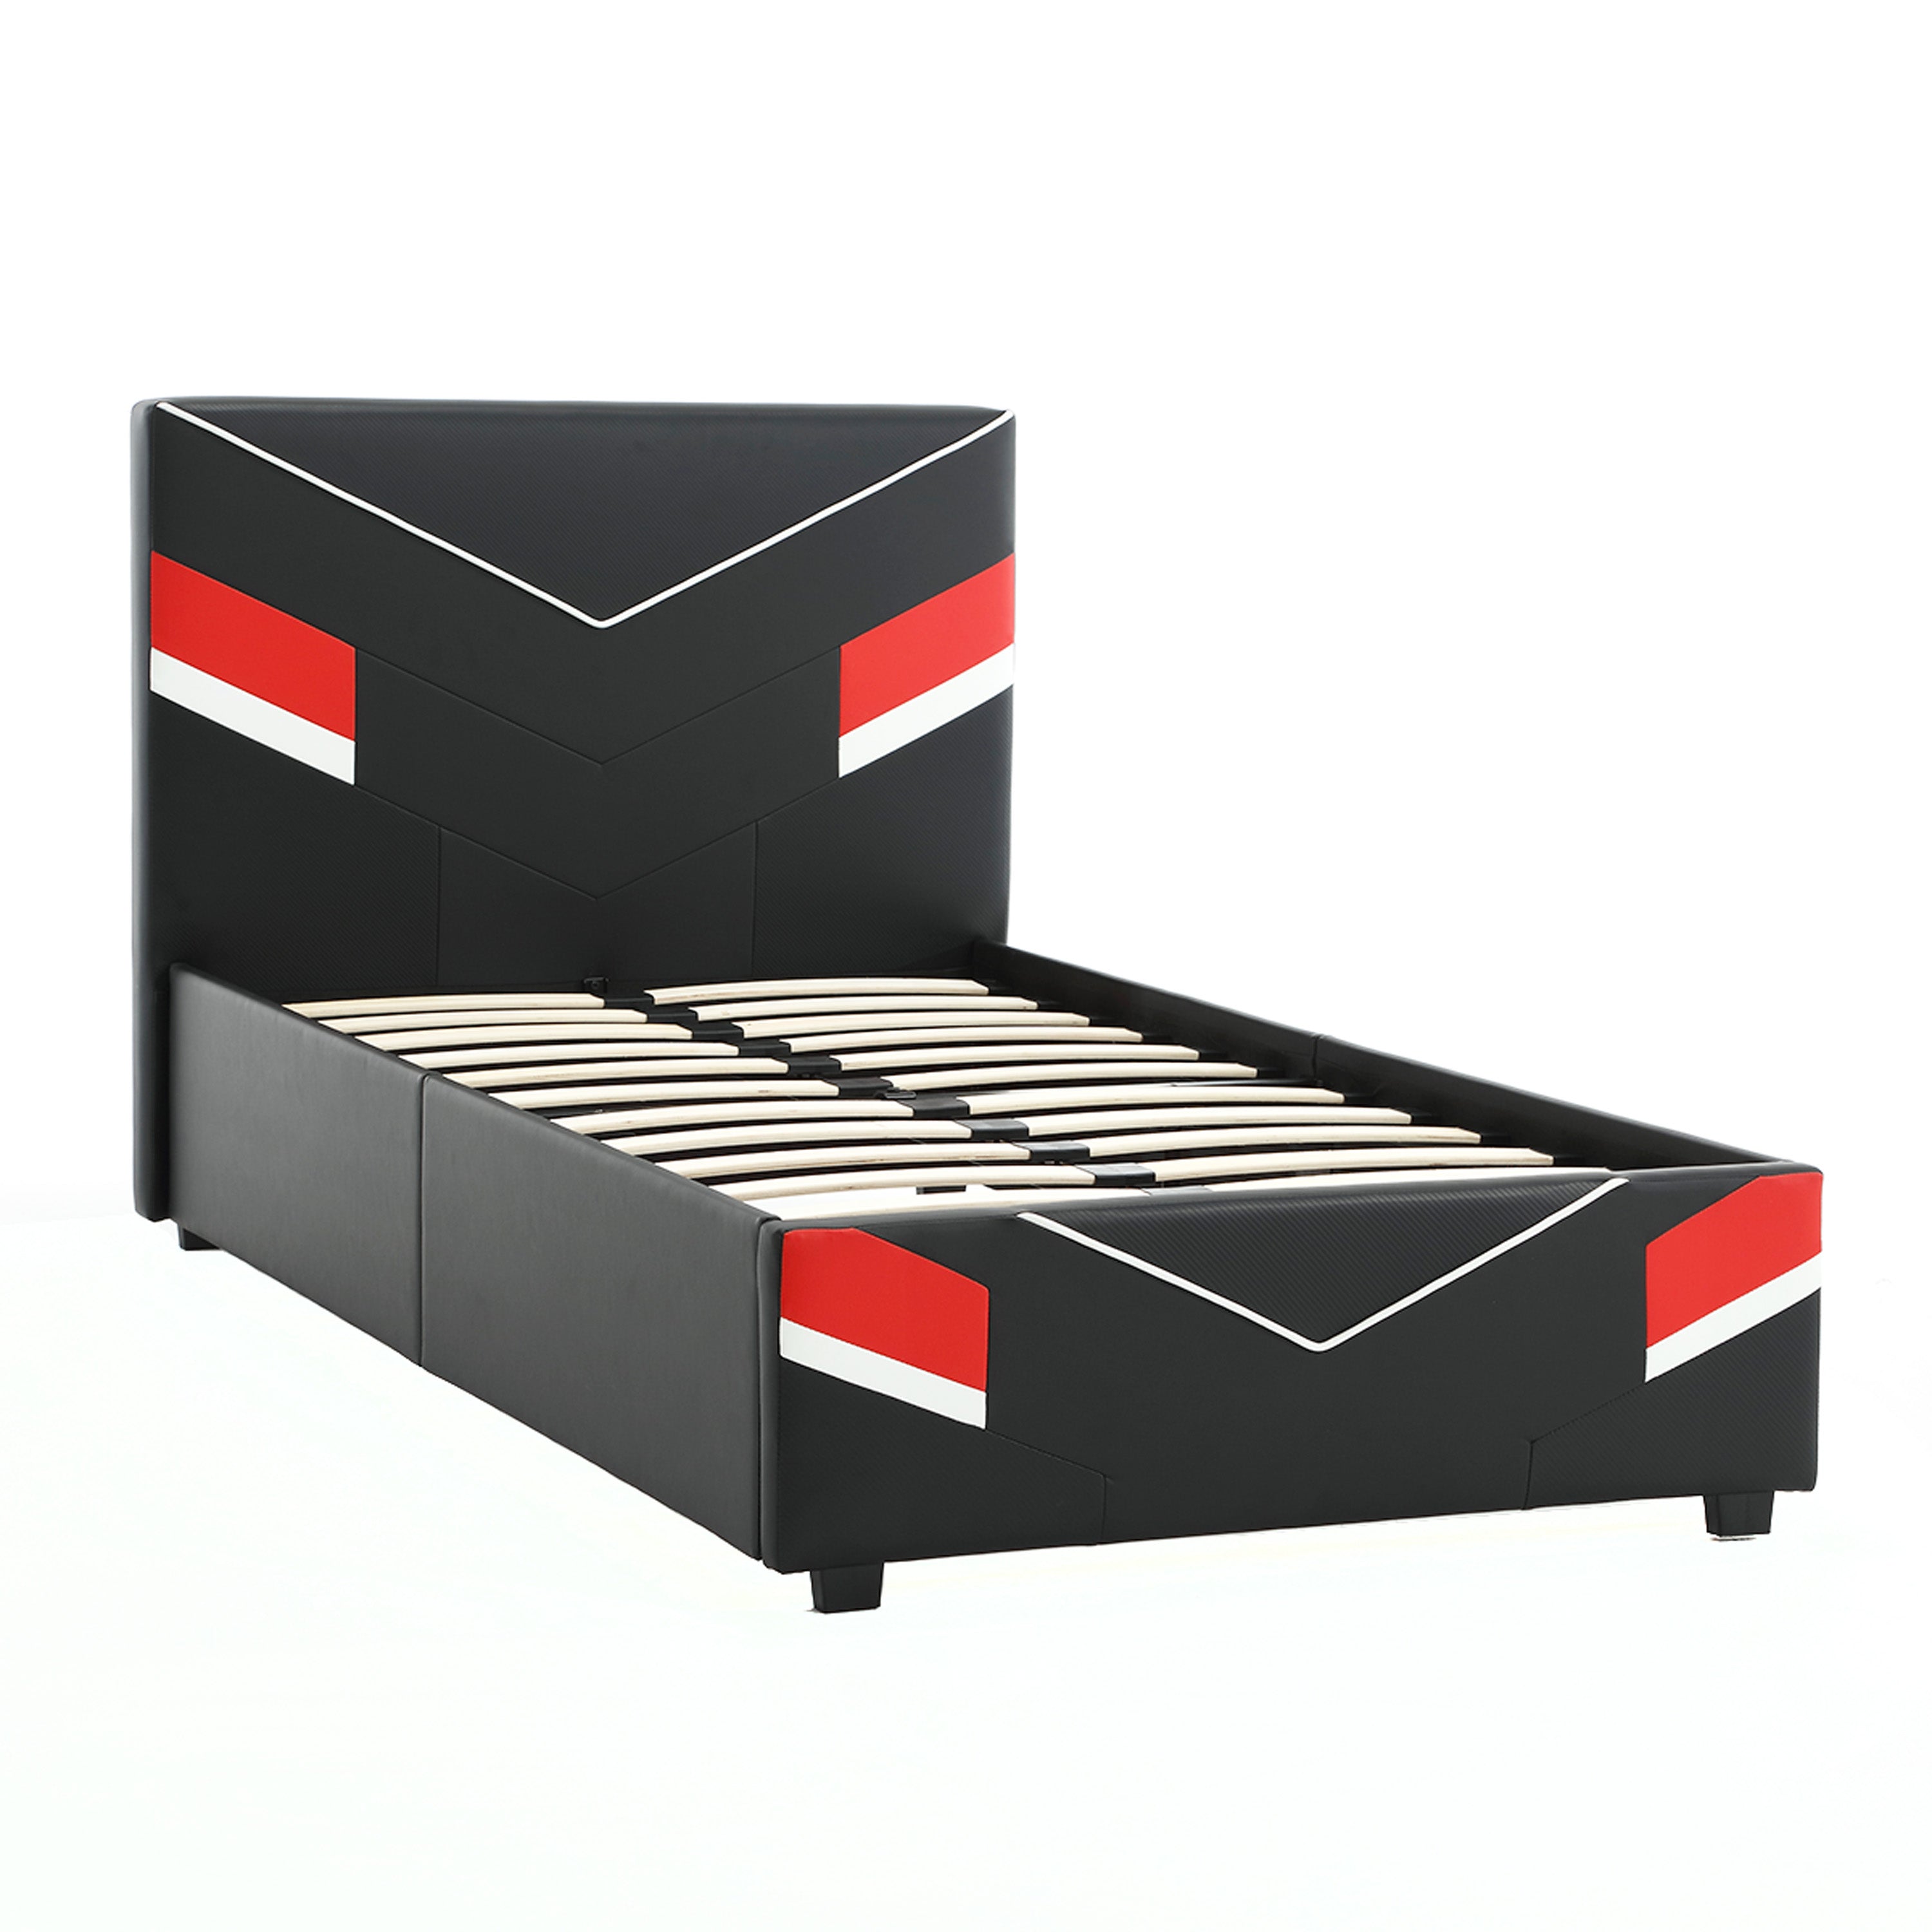 Orion eSports Gaming Bed Frame, Black/Red, Twin